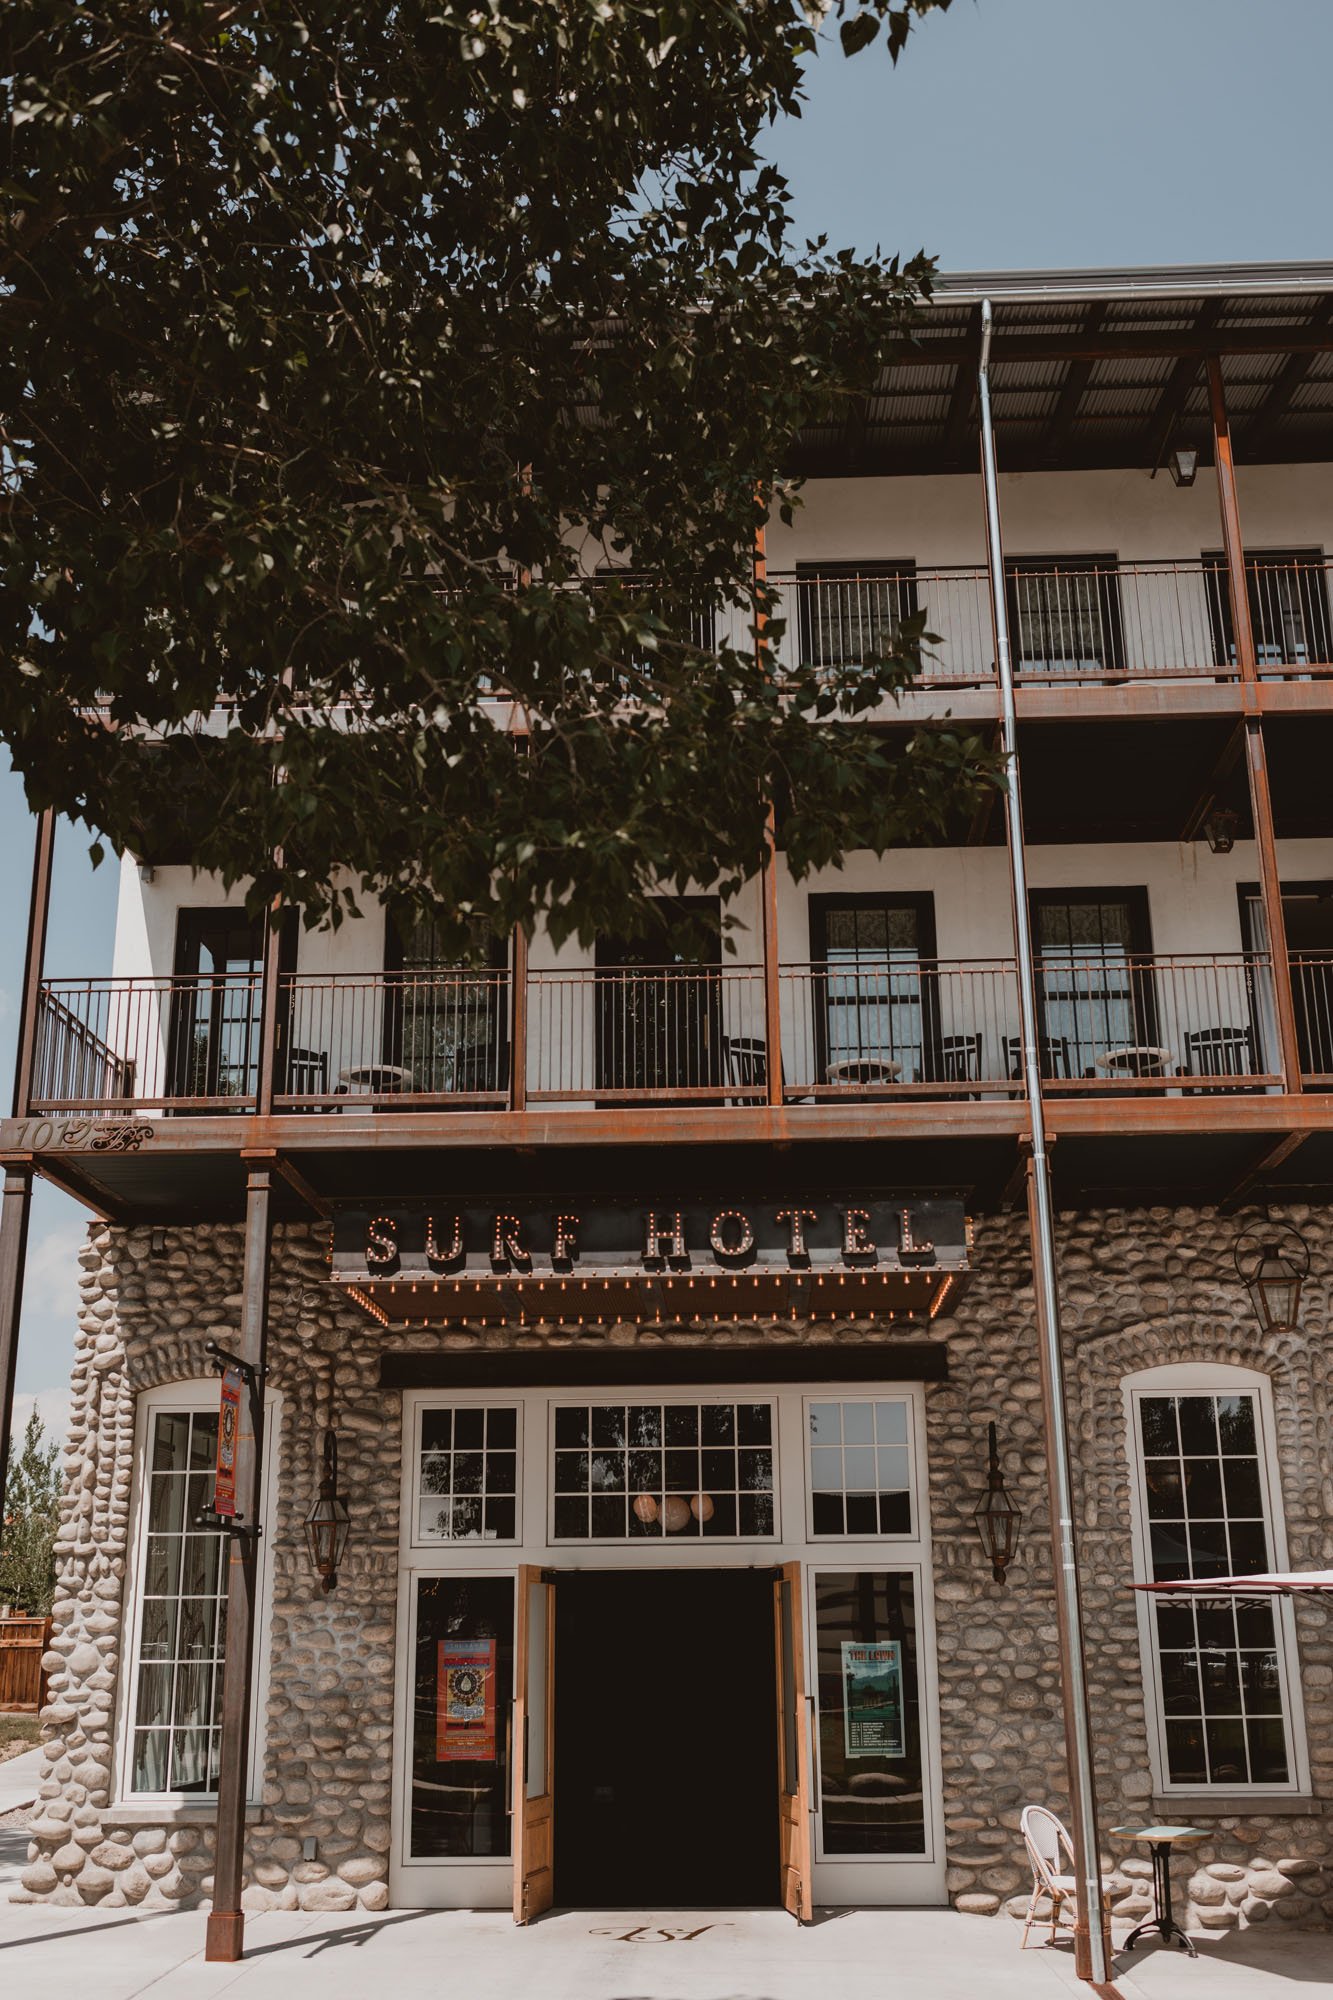 a cool and rustic wedding venue in colorado called the surf hotel.